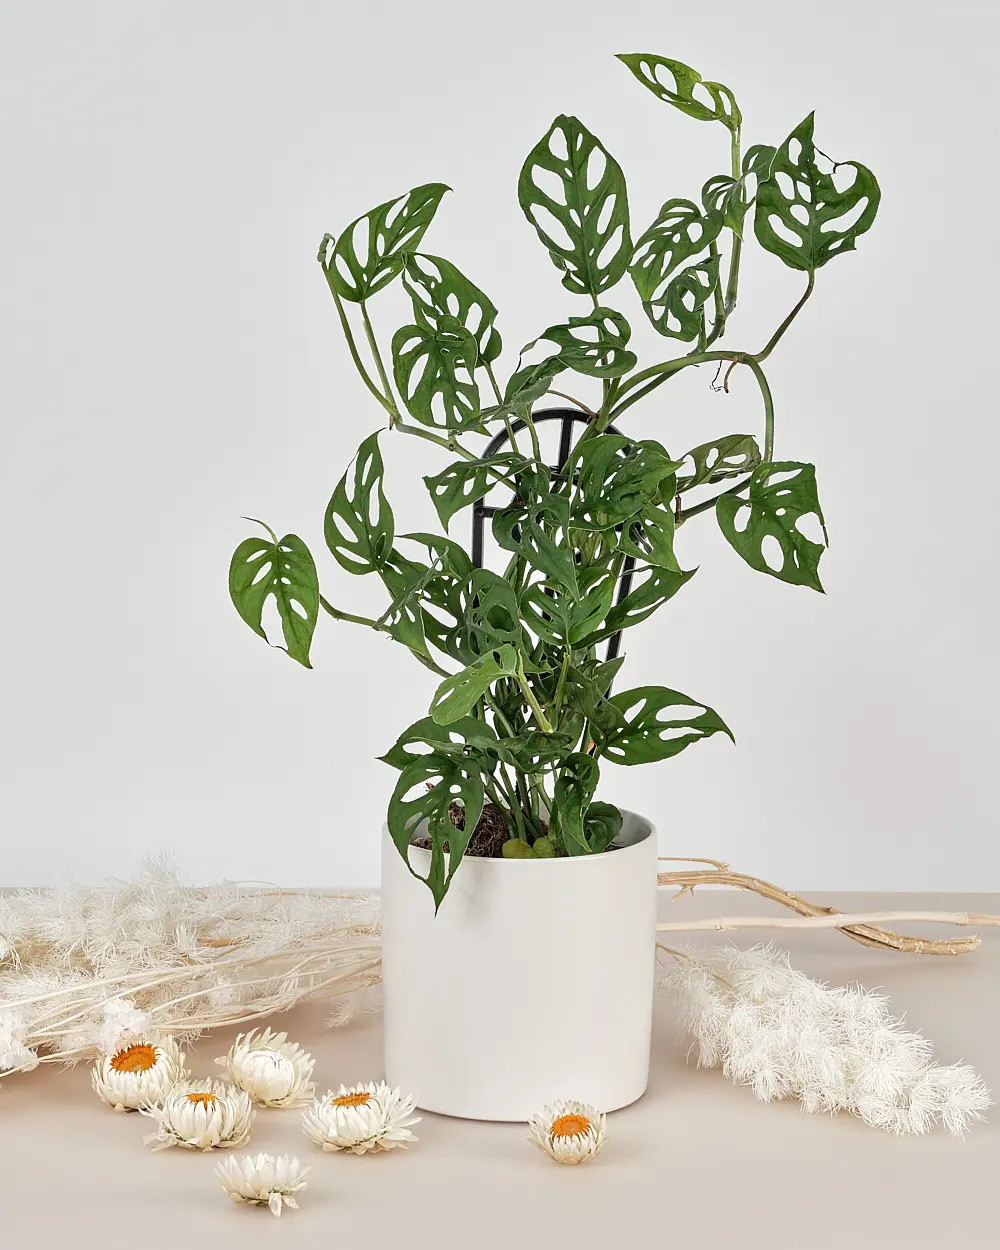 23 Big Houseplants To Make A Bold Statement In Your Living Room - 155